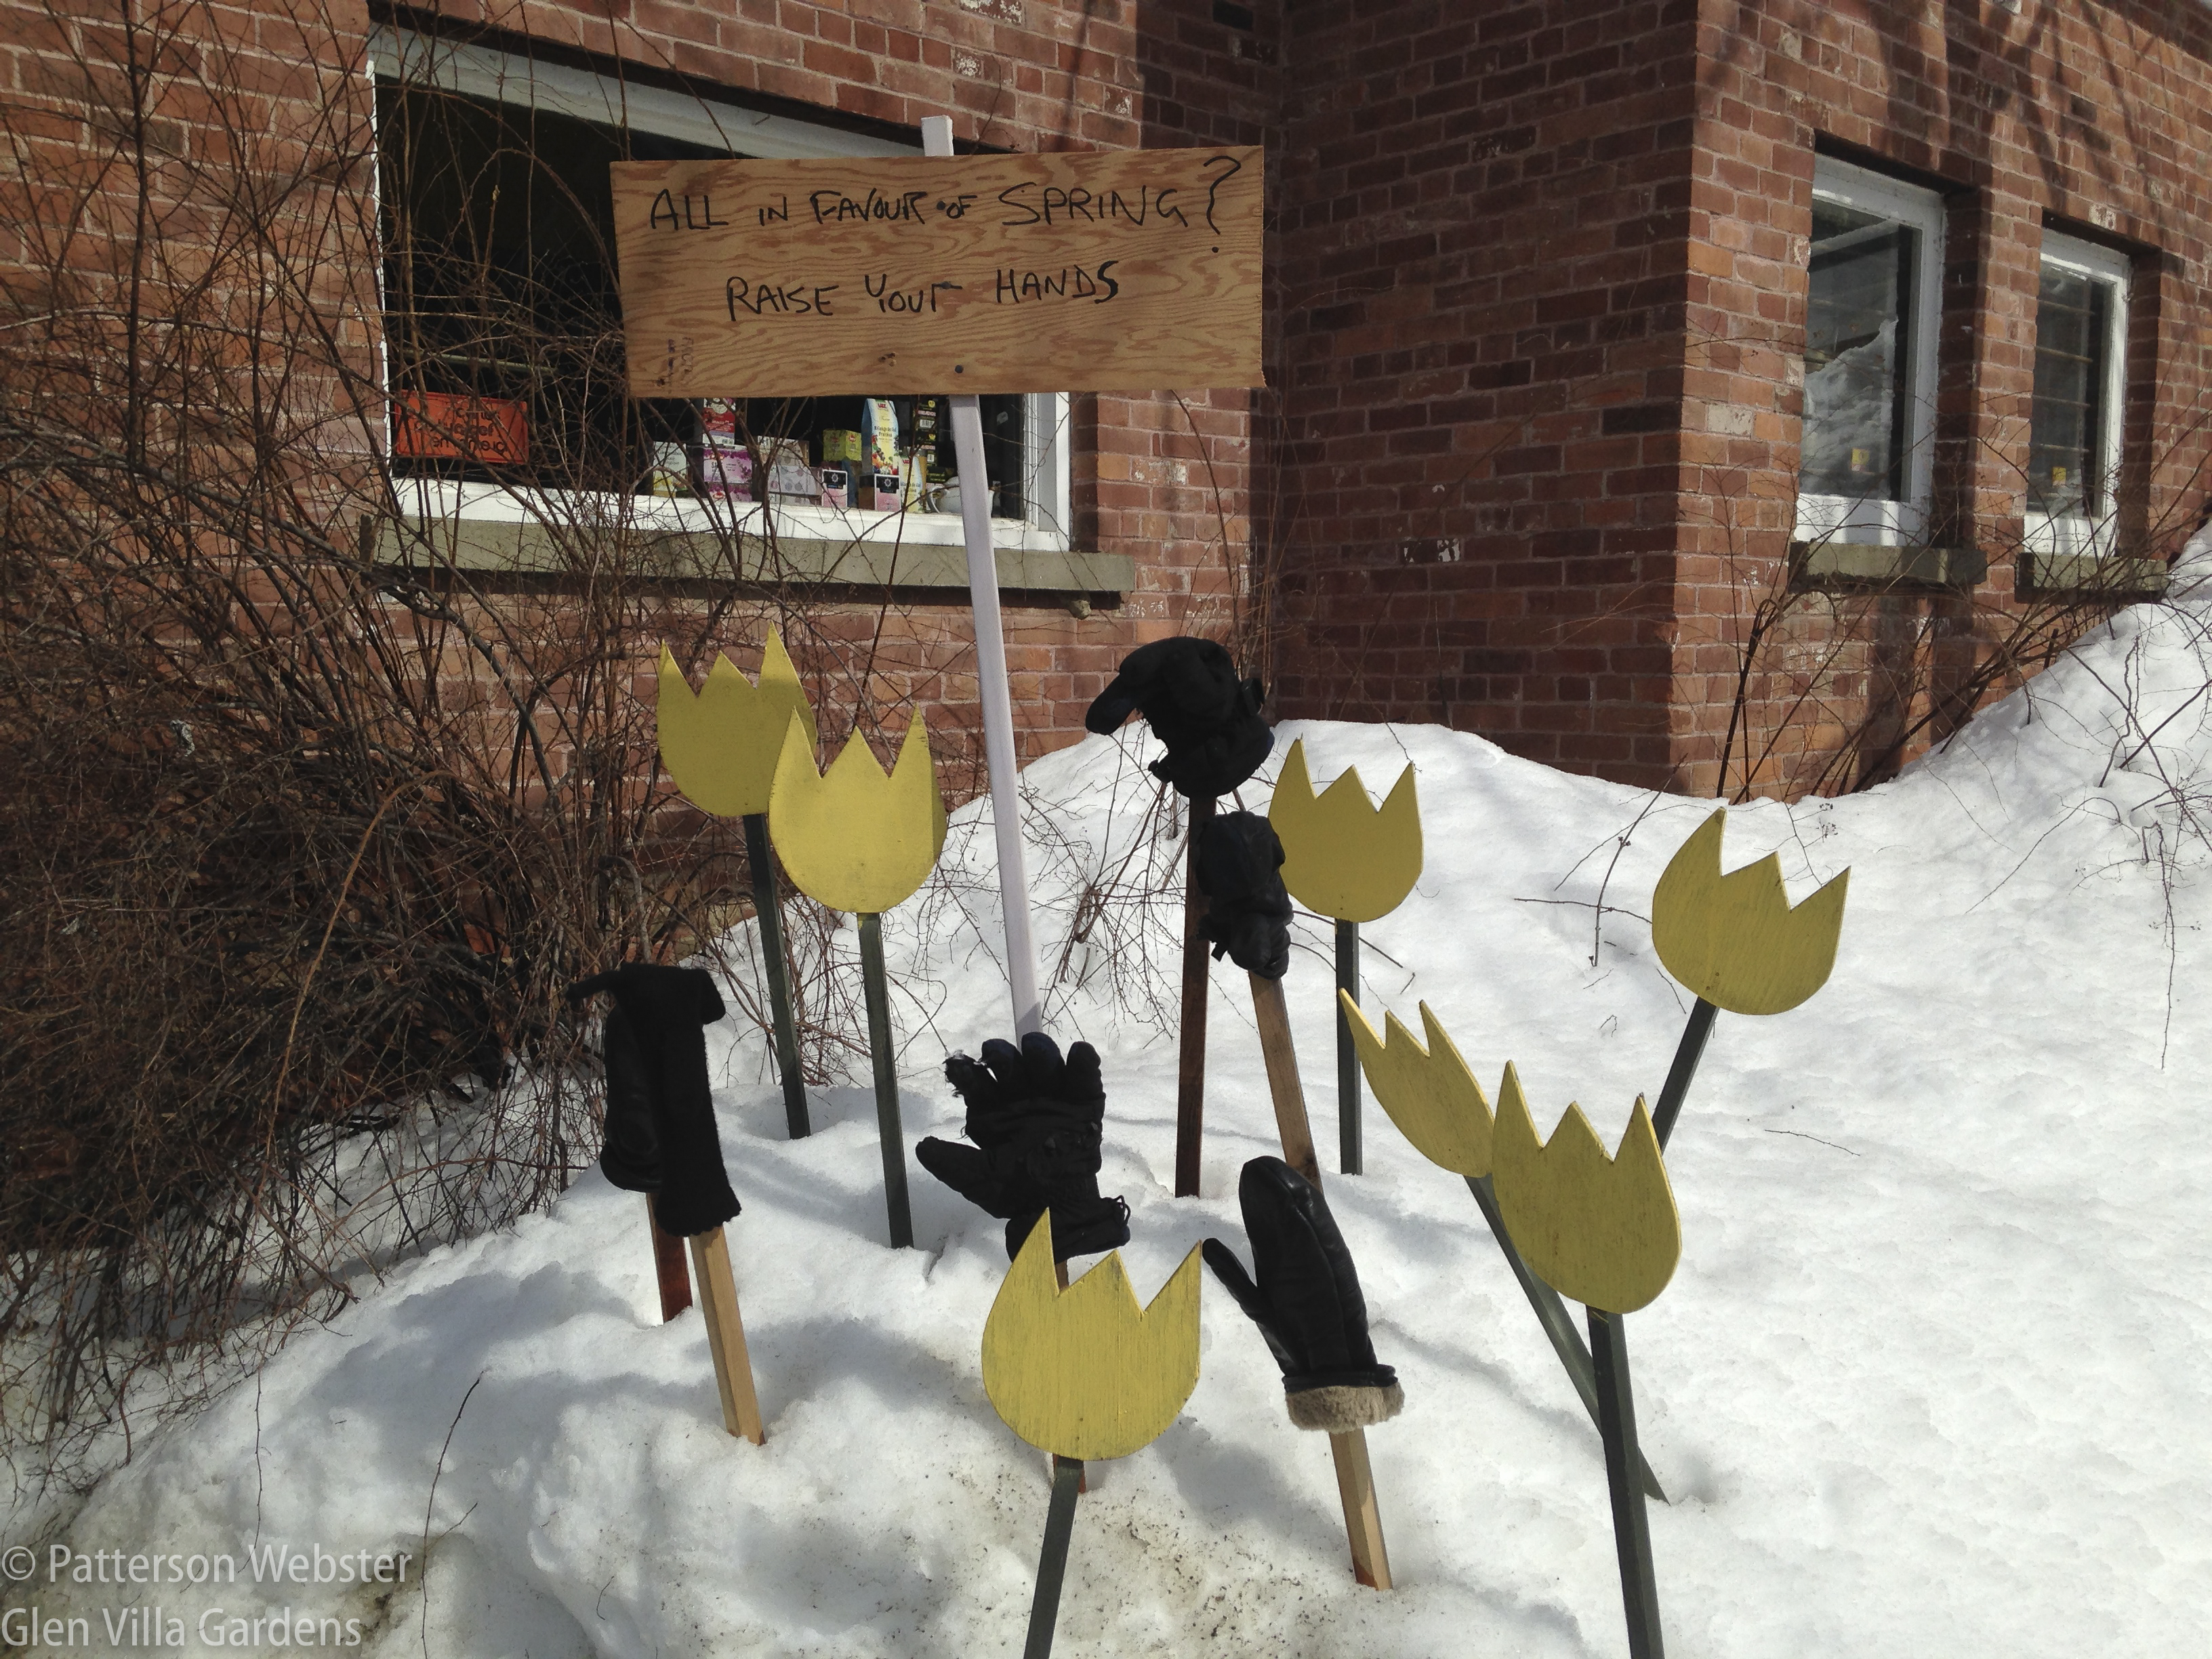 Gloves lost over the winter are there for the taking. I'd rather take the tulips, even if they are made of wood.